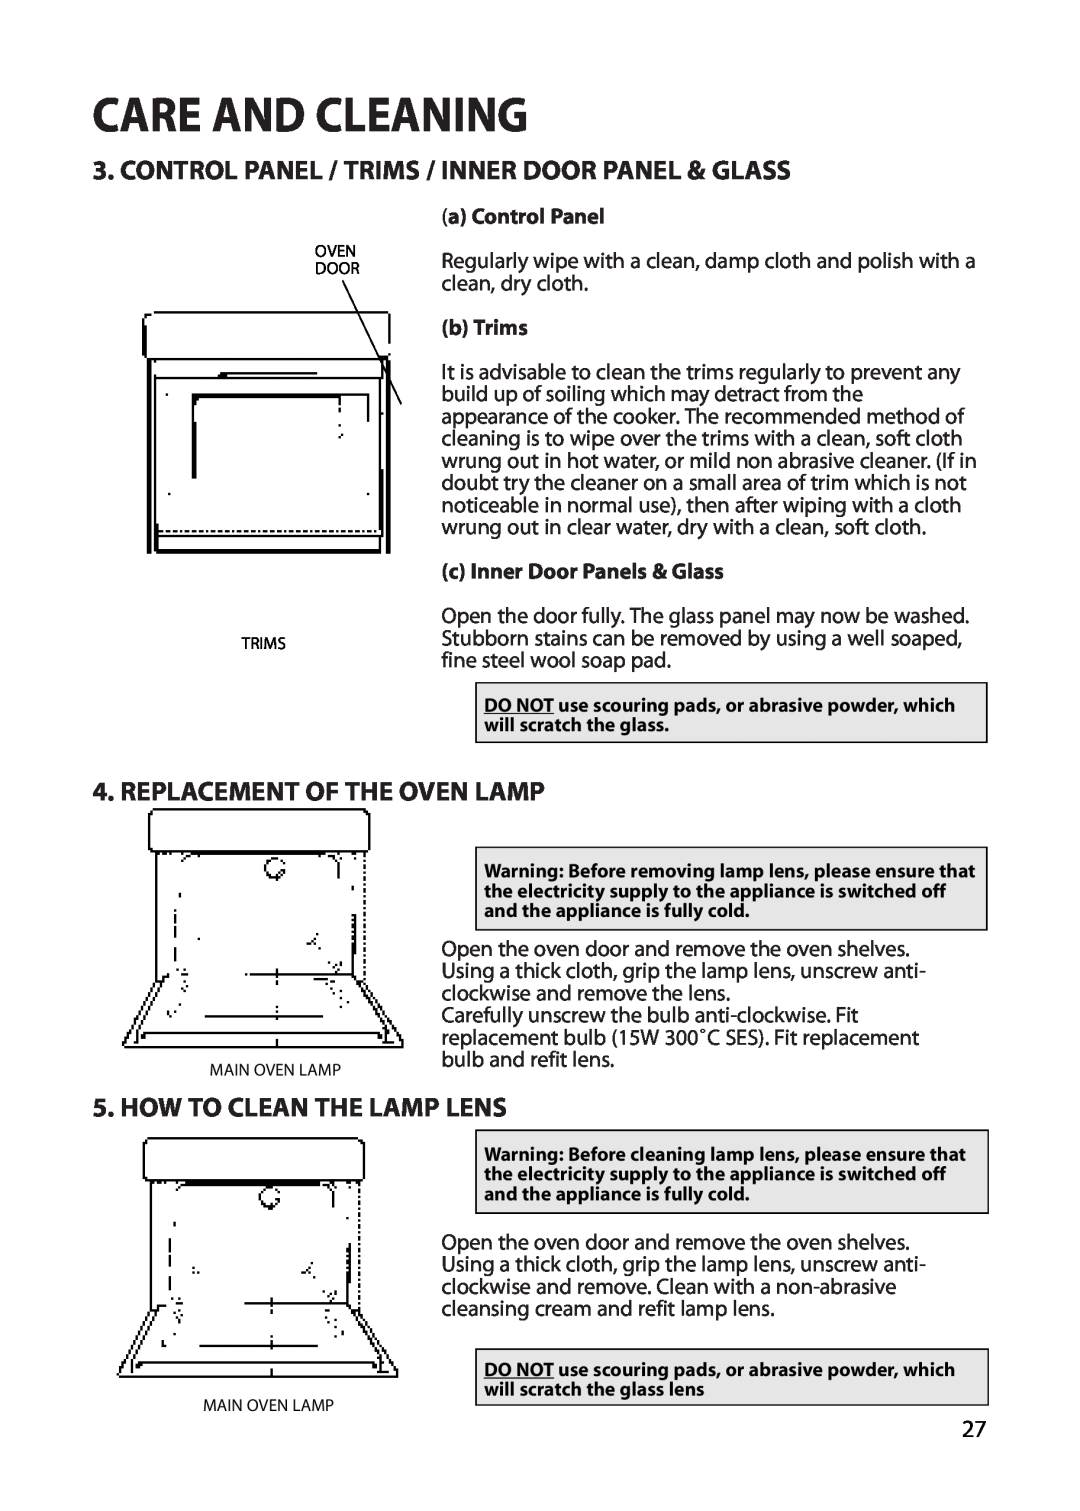 Creda REFLECTION Care And Cleaning, Replacement Of The Oven Lamp, How To Clean The Lamp Lens, a Control Panel, b Trims 